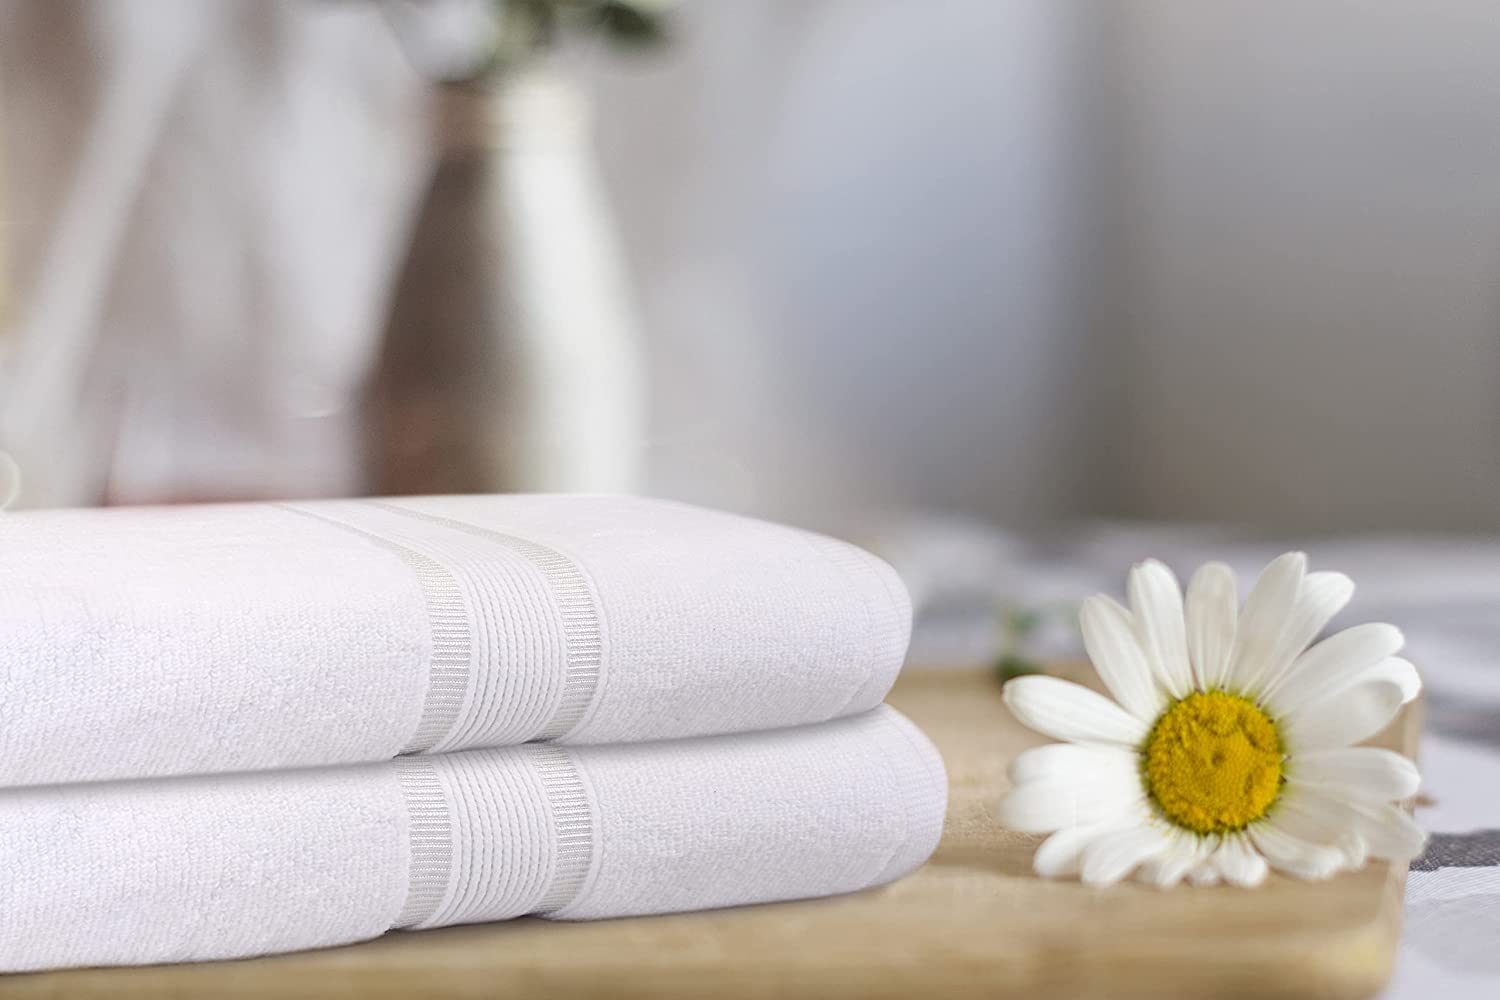 White Bath Towels–75 x 145cm Soft and Absorbent, Premium Quality Perfect for Daily Use 100% ZERO Twist Cotton Towel